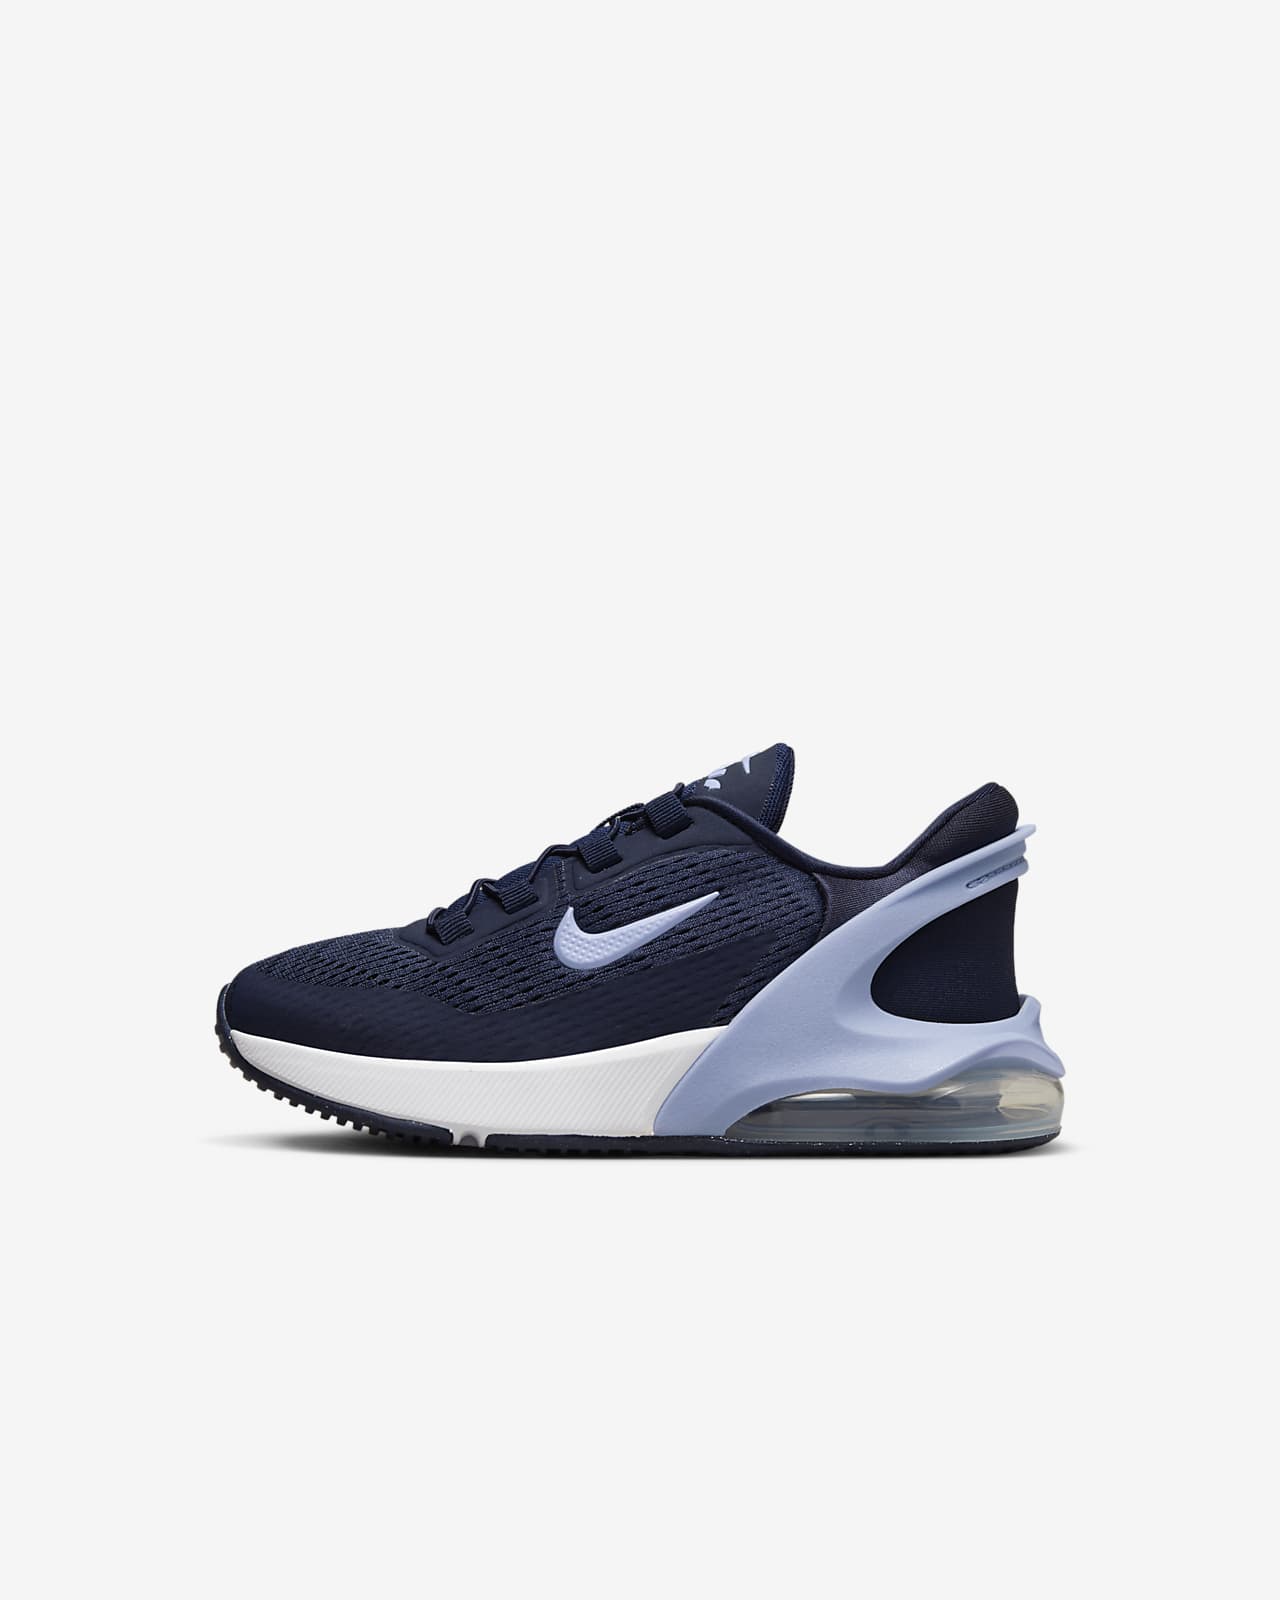 Nike Max 270 GO Younger Kids' Easy On/Off Shoes. Nike LU